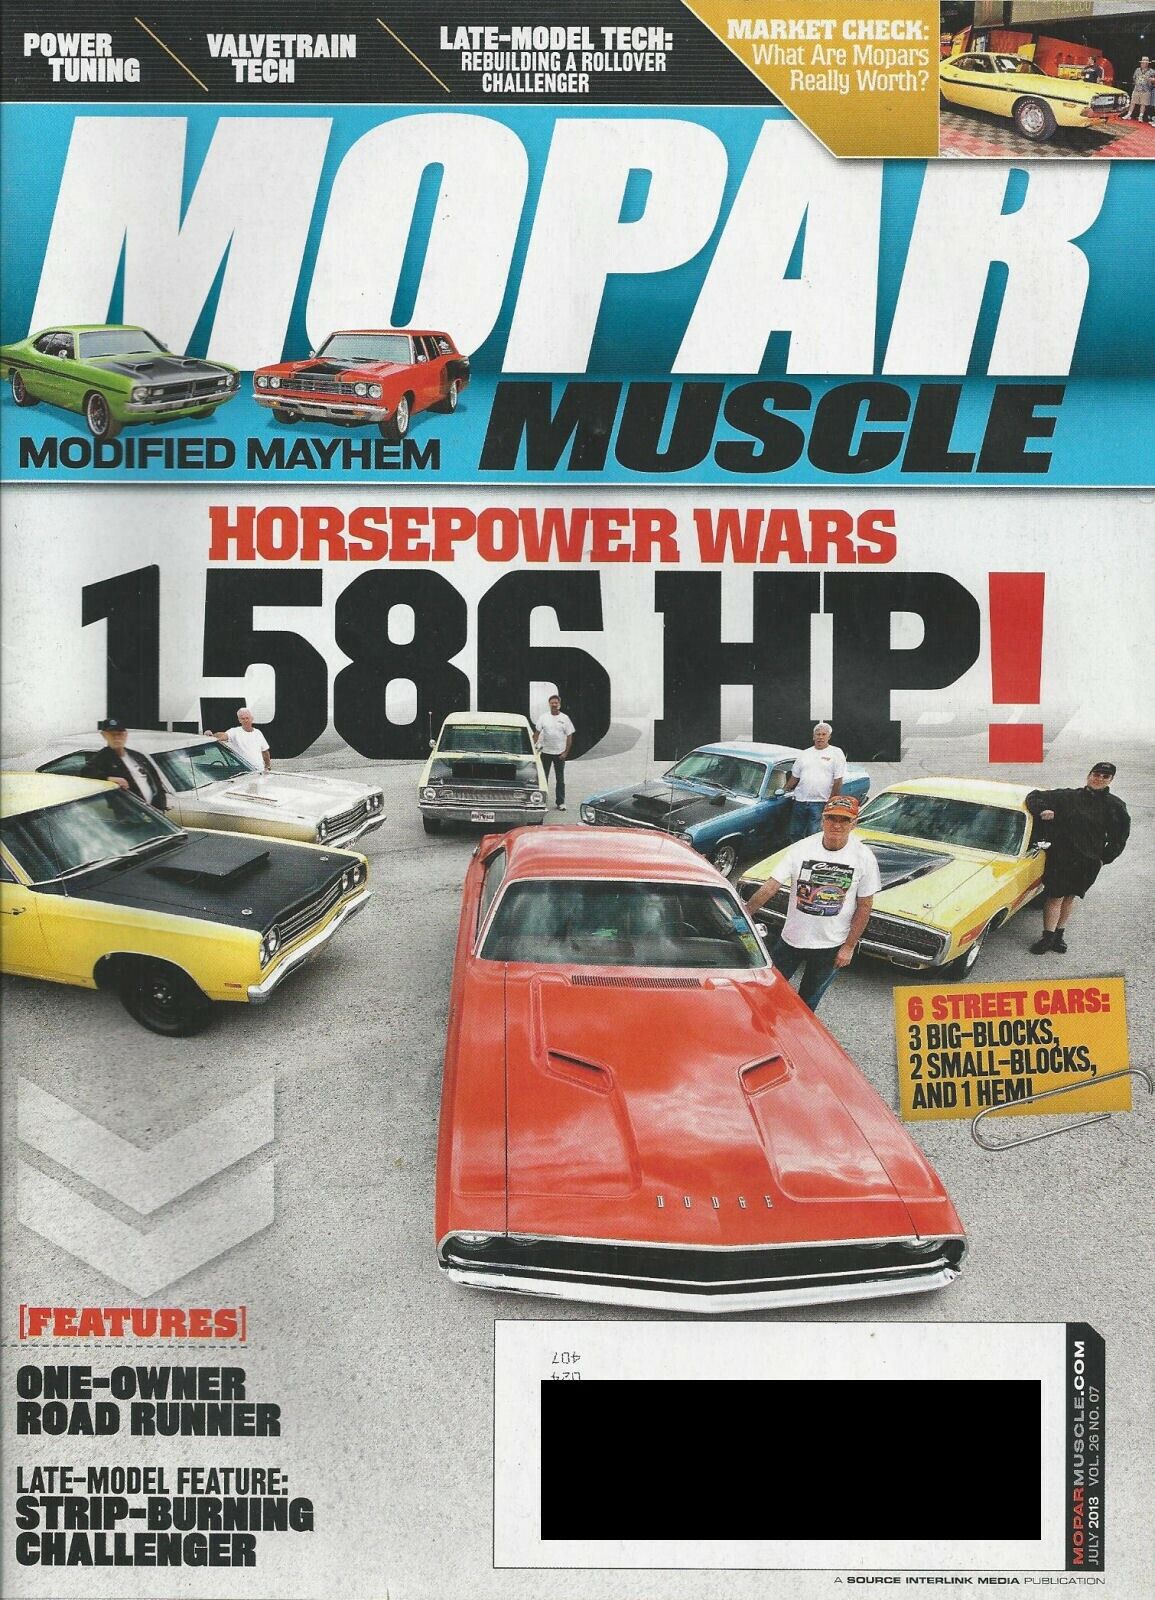 Mopar Muscle magazine July 2013 excellent condition Dodge Plymouth Chrysler